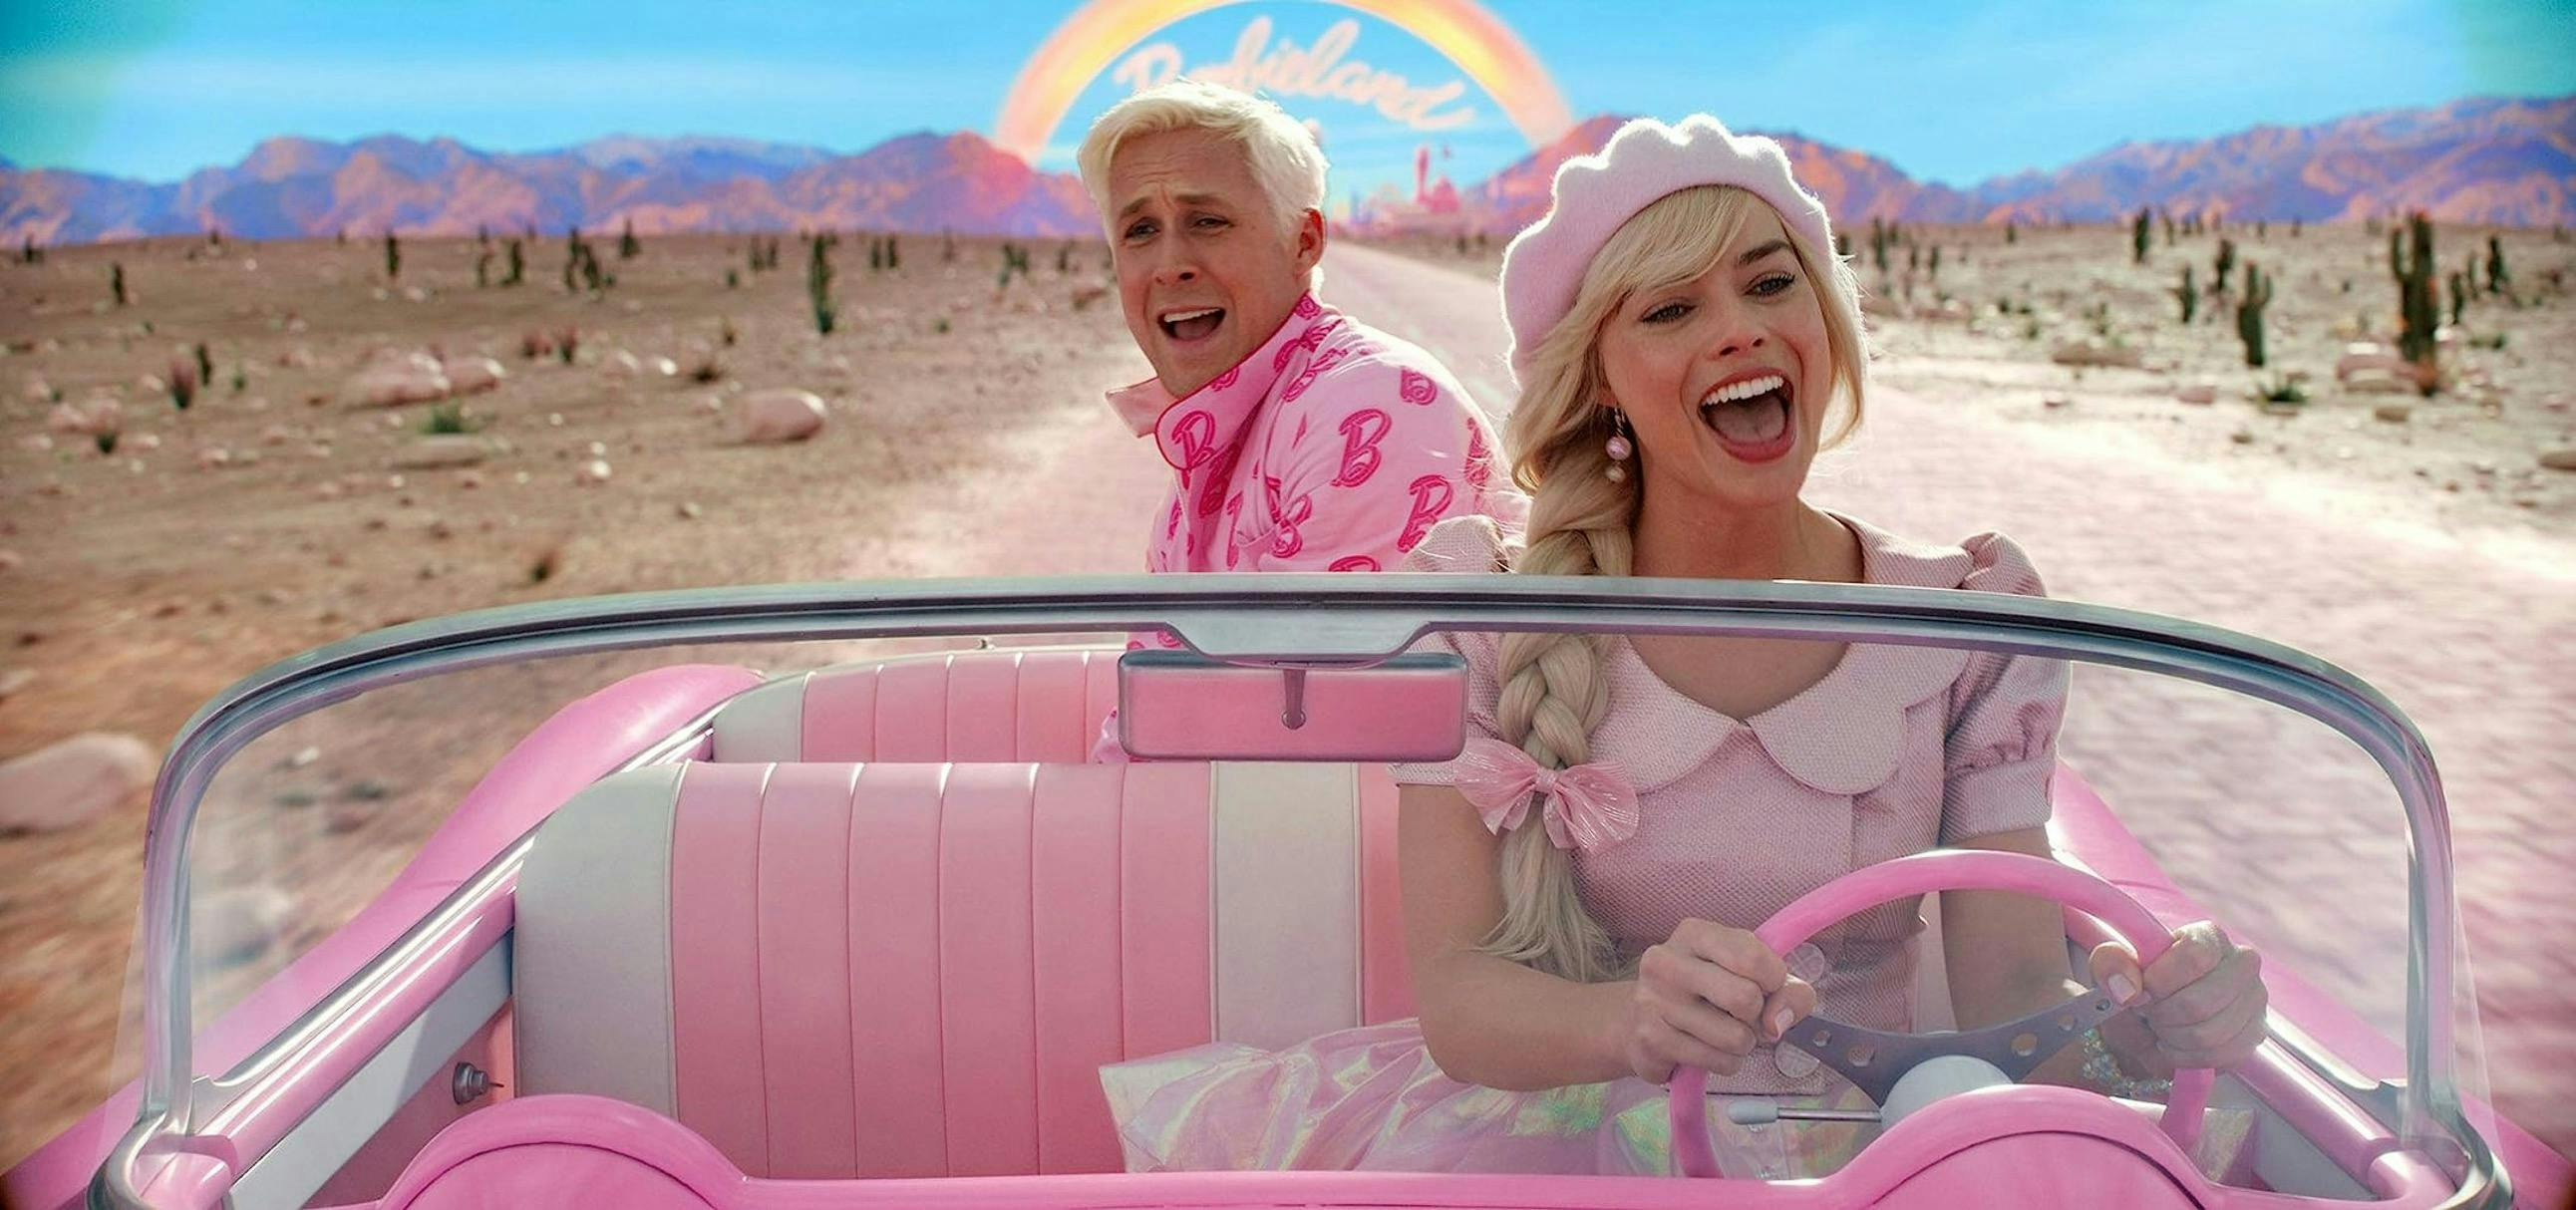 Barbie and Ken driving in a car through Barbie Land